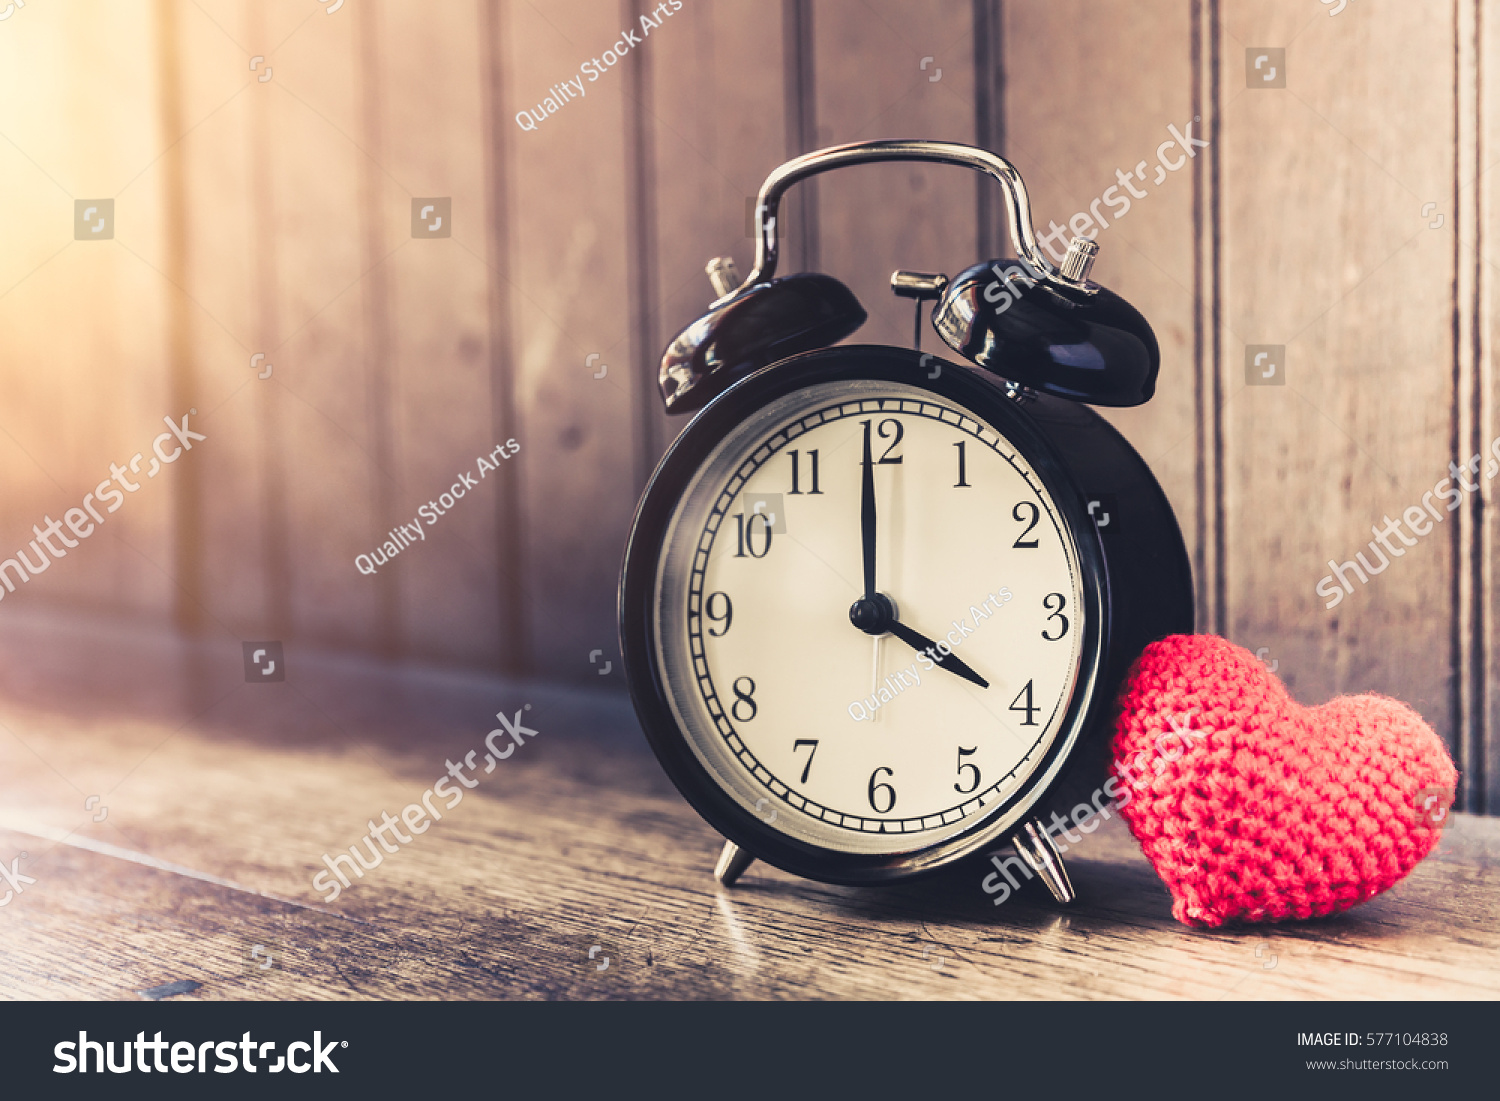 Love clock vintage tone timed 4 o'clock, Time of sweet loving past memories story on the old wood background. #577104838